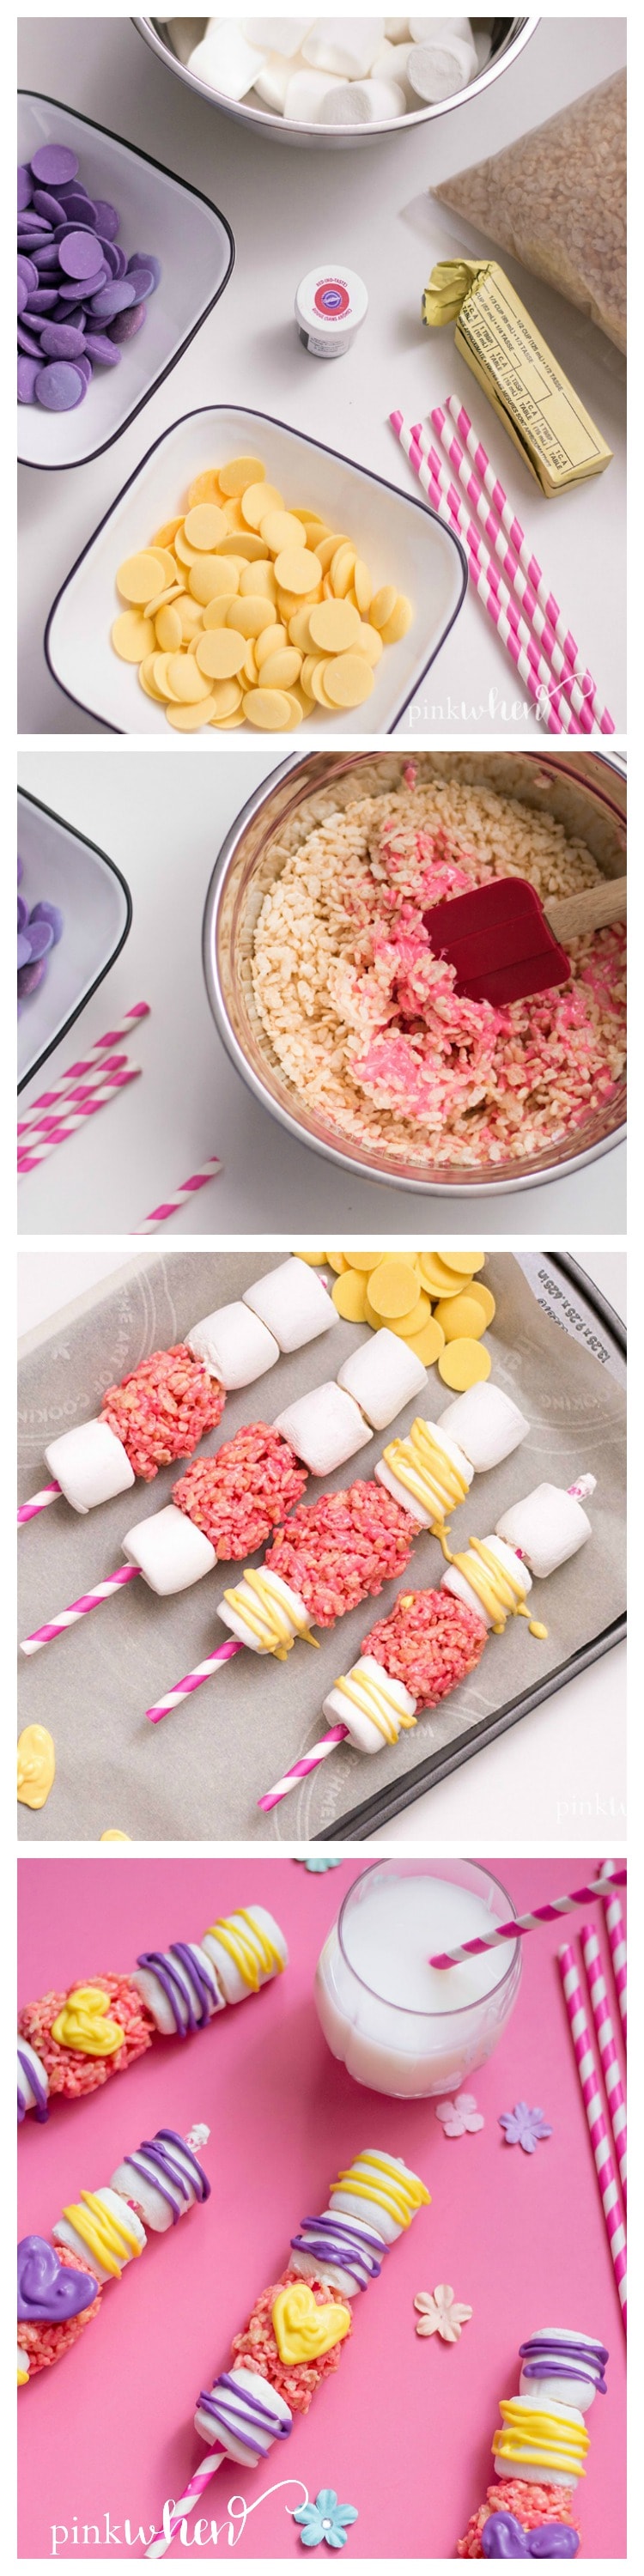 A cute and simple treat, these Mothers Day Dessert Skewers are fun for mom and kiddos! #MothersDay #DessertIdeas